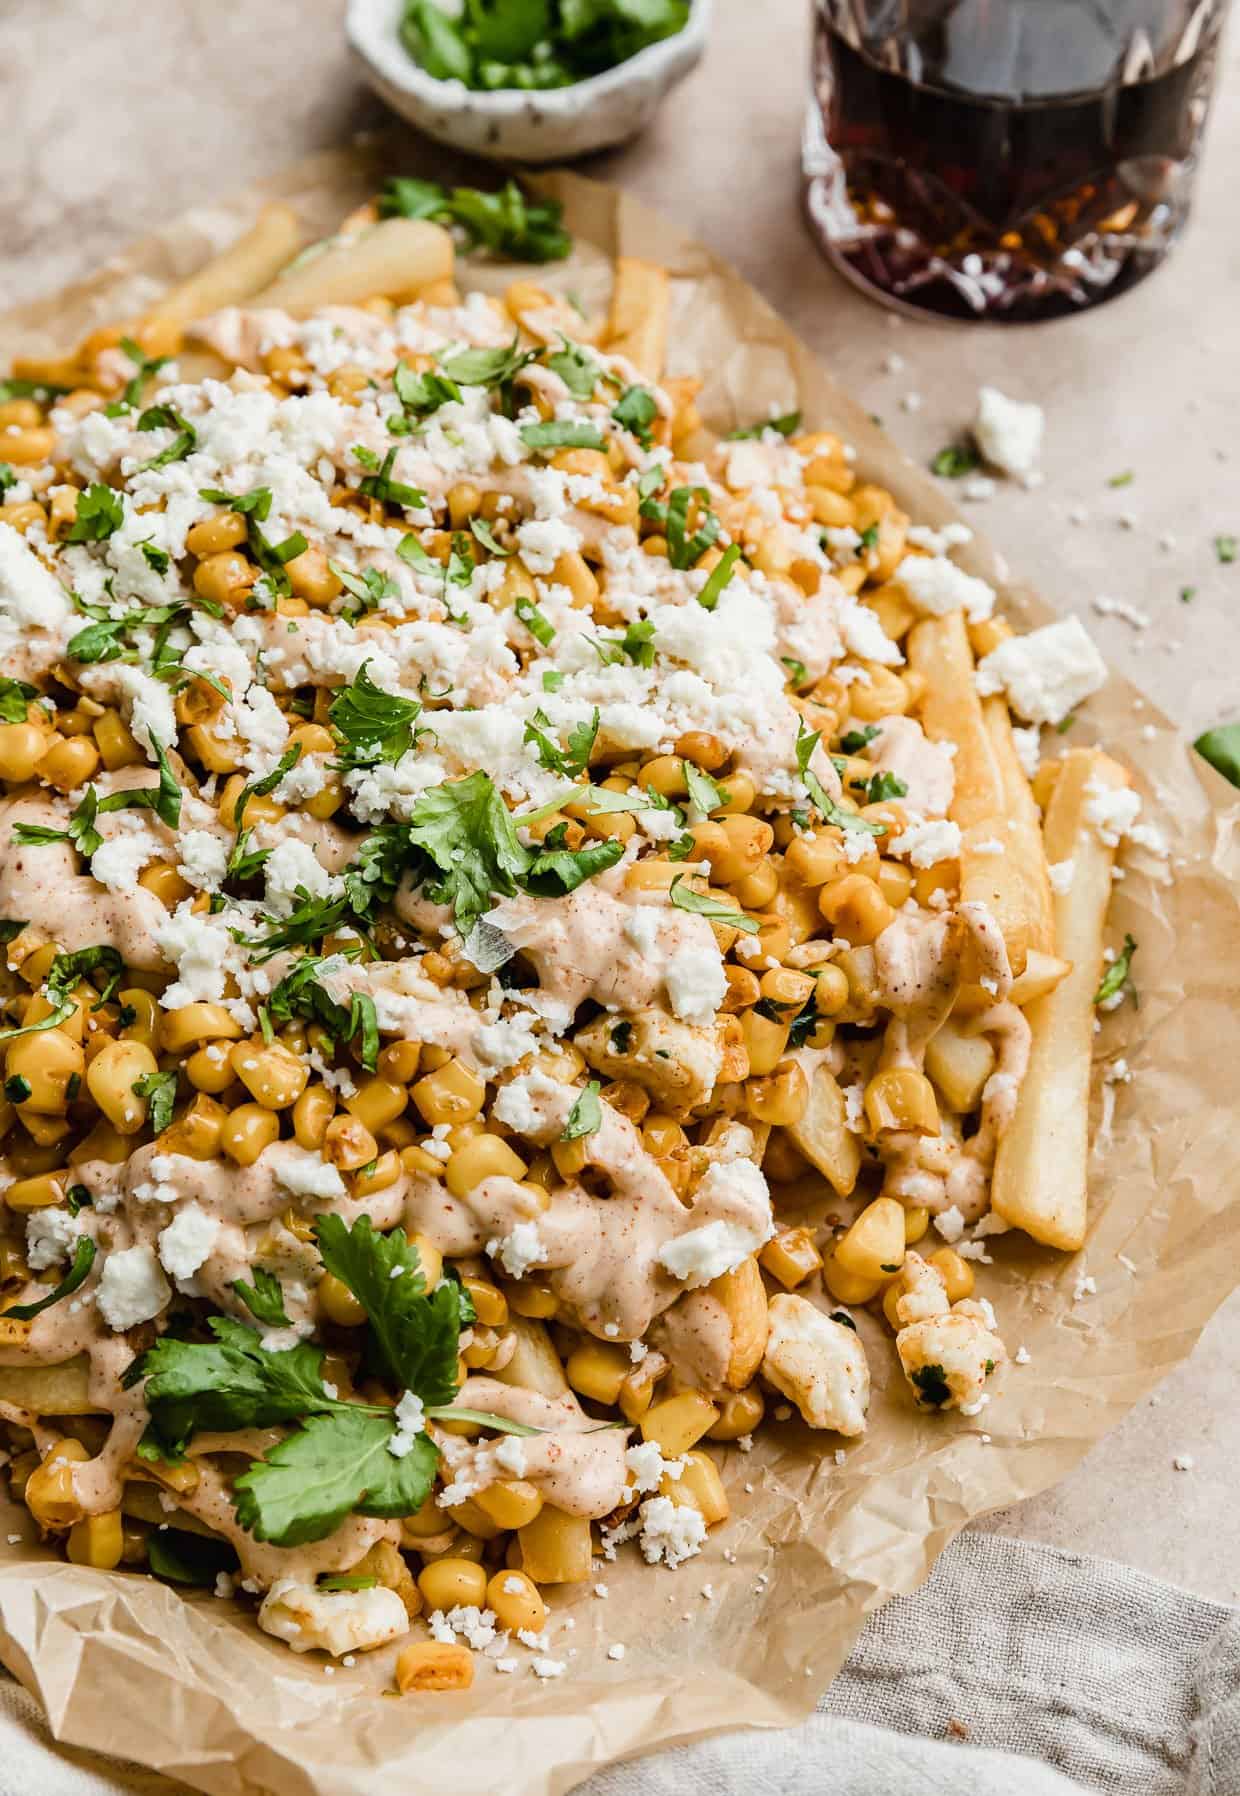 Mexican Street Corn fries on a parchment paper topped with queso fresco cheese and cilantro.